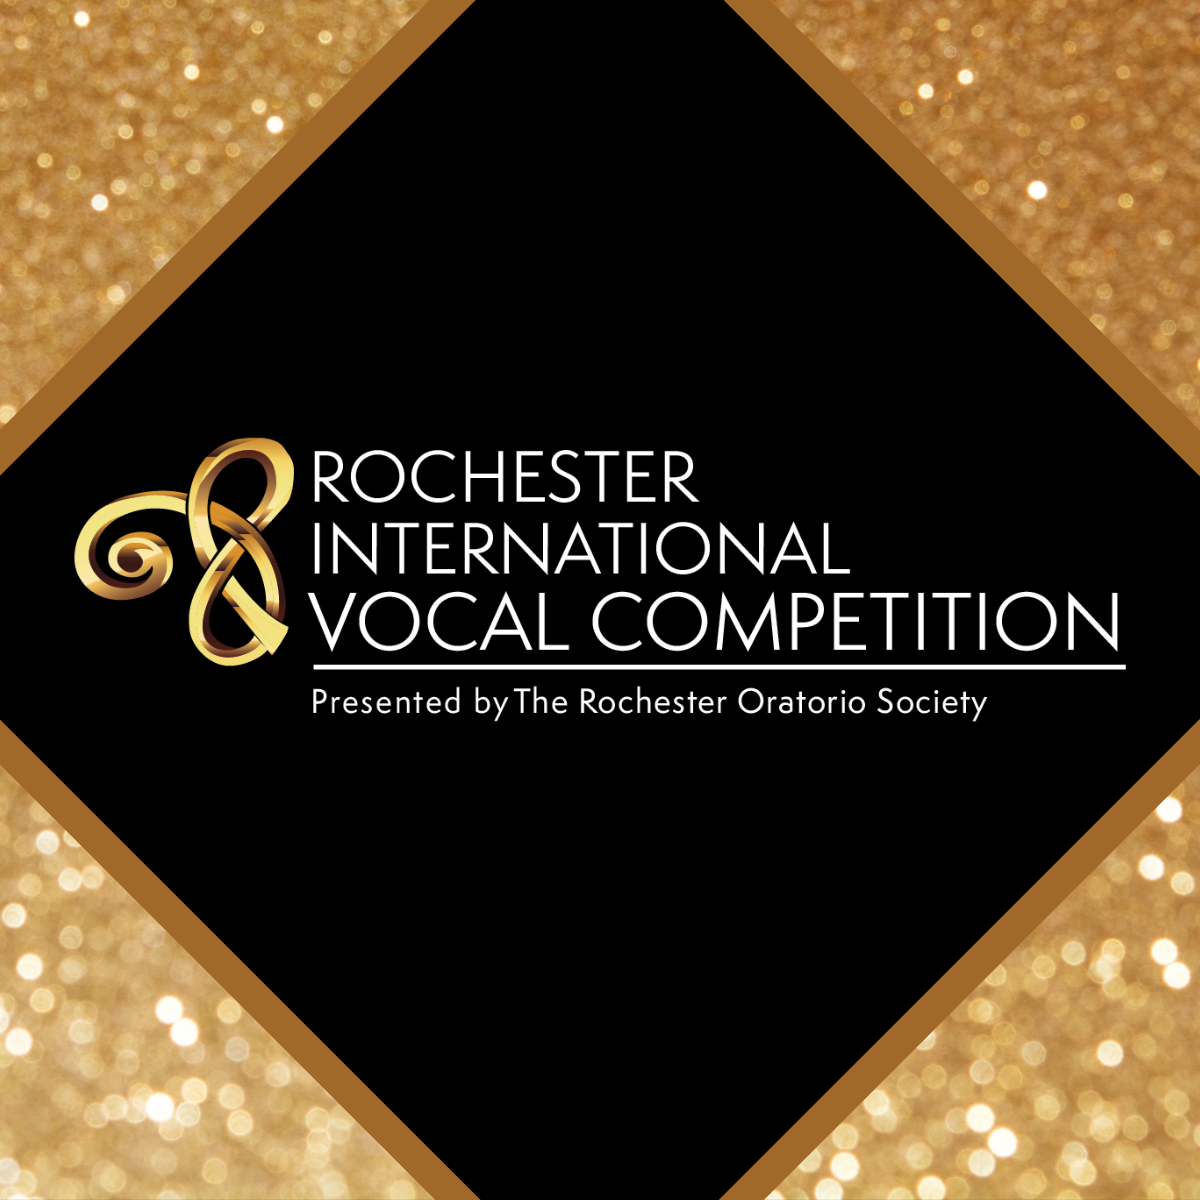 Rochester International Vocal Competition Brings Worldwide Vocal Excellence to Finger Lakes